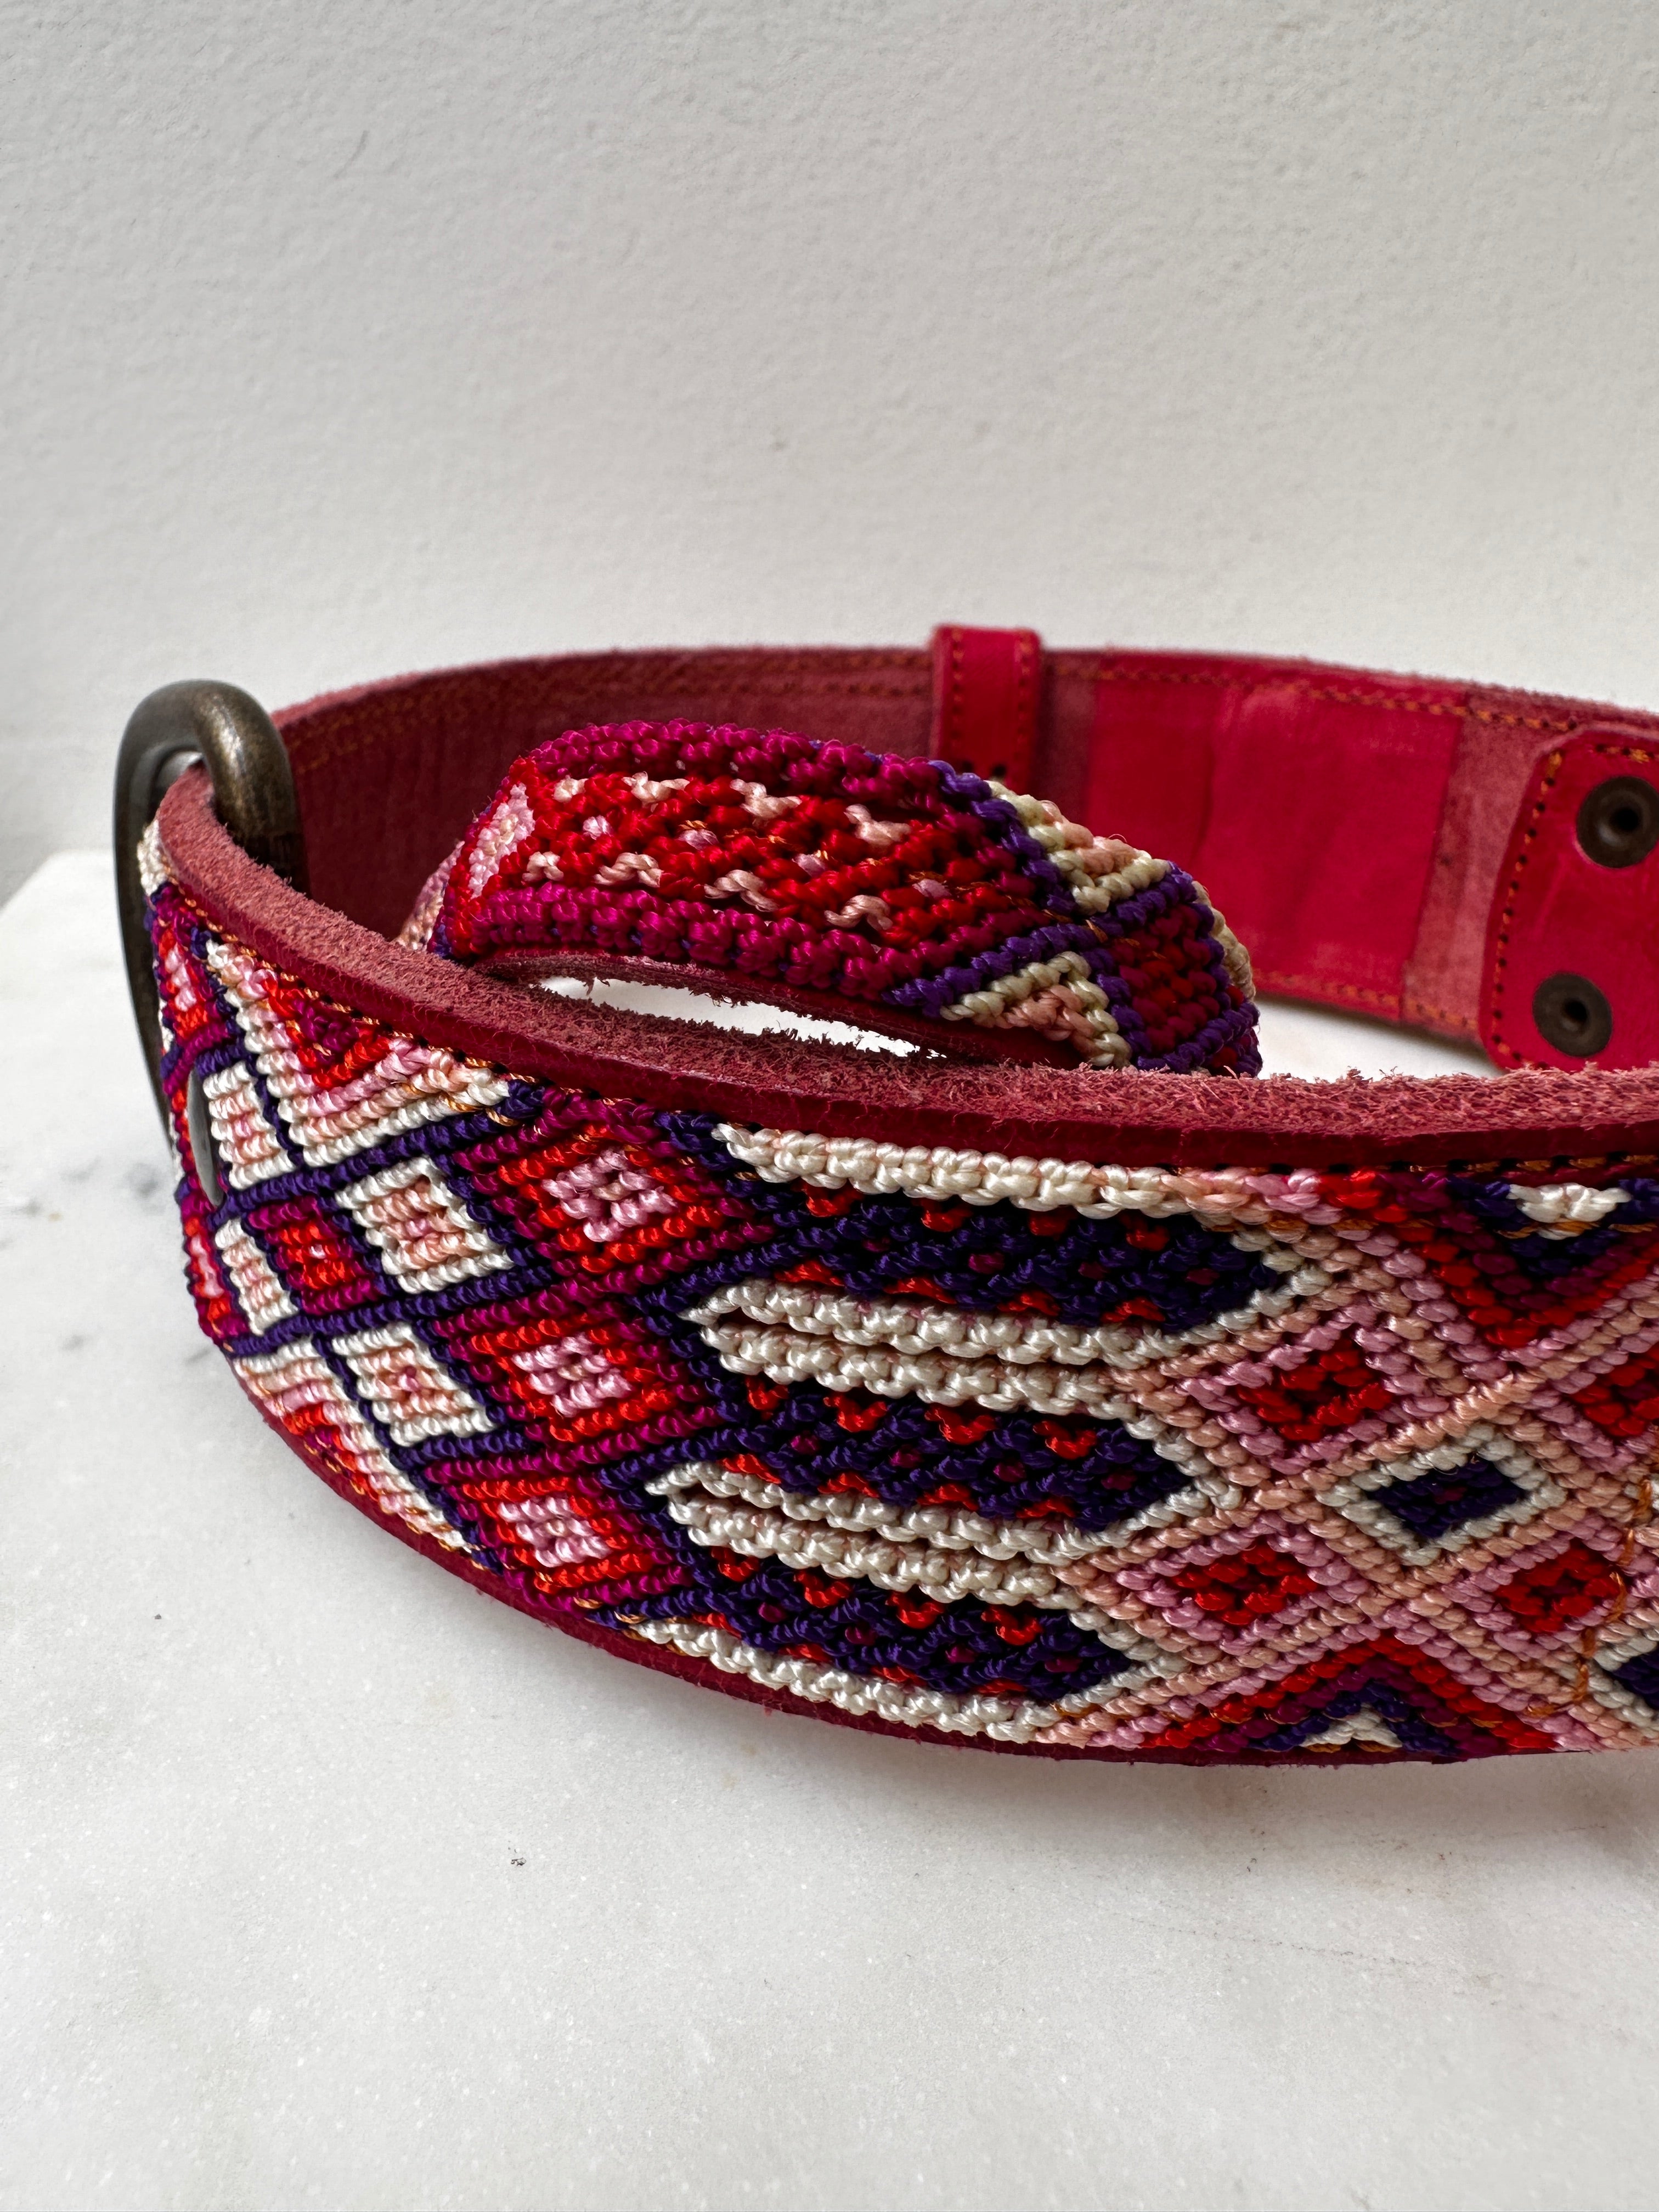 Future Nomads Homewares One Size Huichol Leather Wide Dog Collar L2